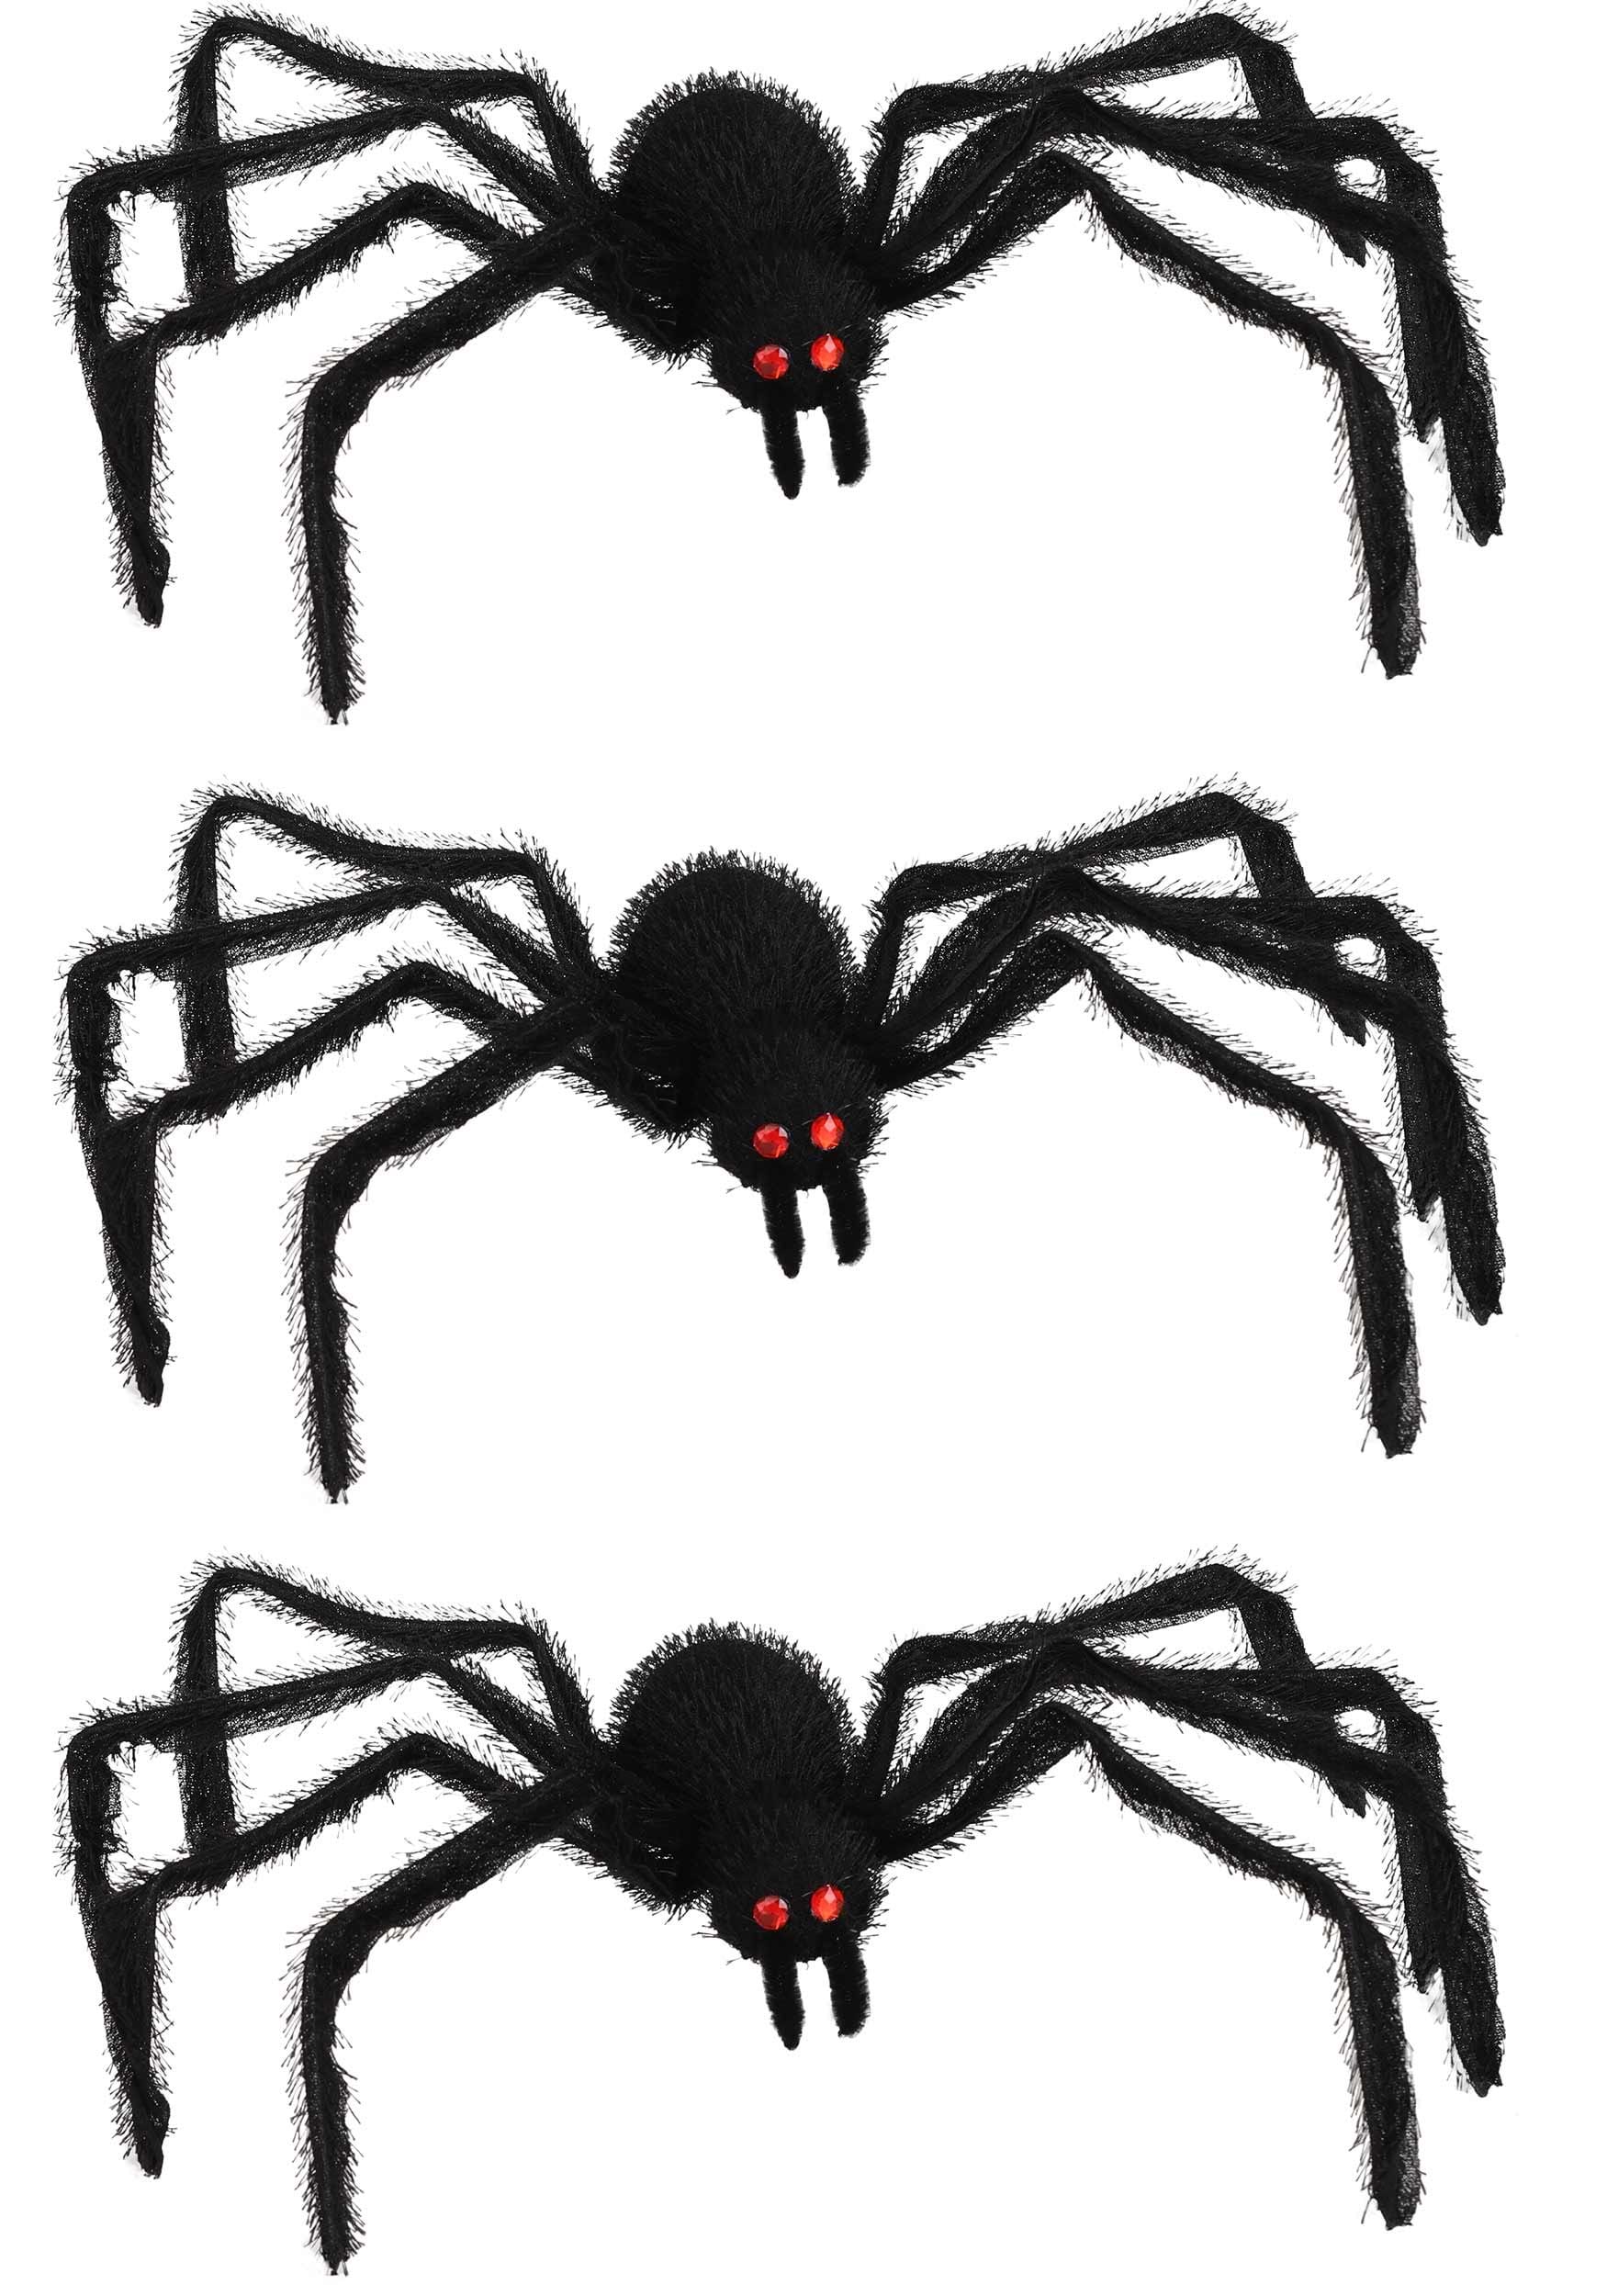 Black Spiders 3-pack | Scary Spider Decorations | Exclusive